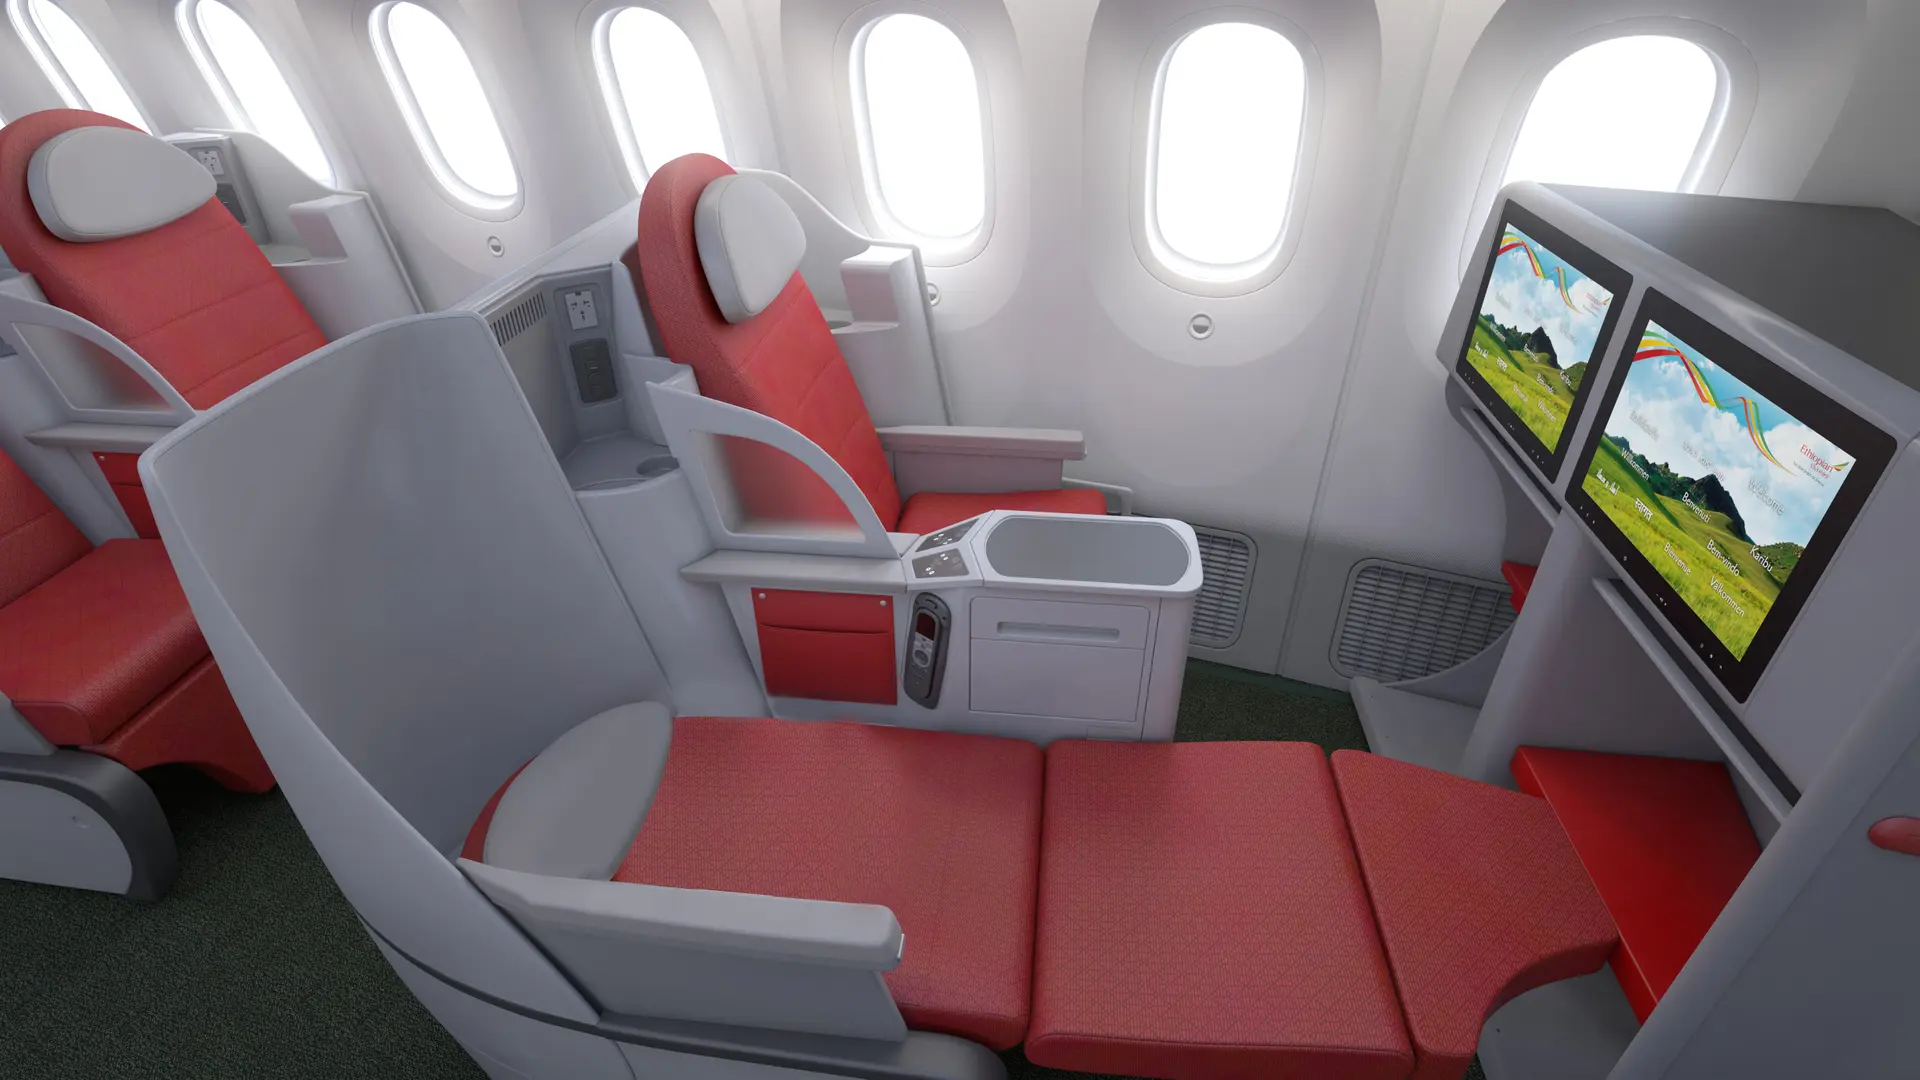 Airline review Cabin & Seat - Ethiopian Airlines - 4